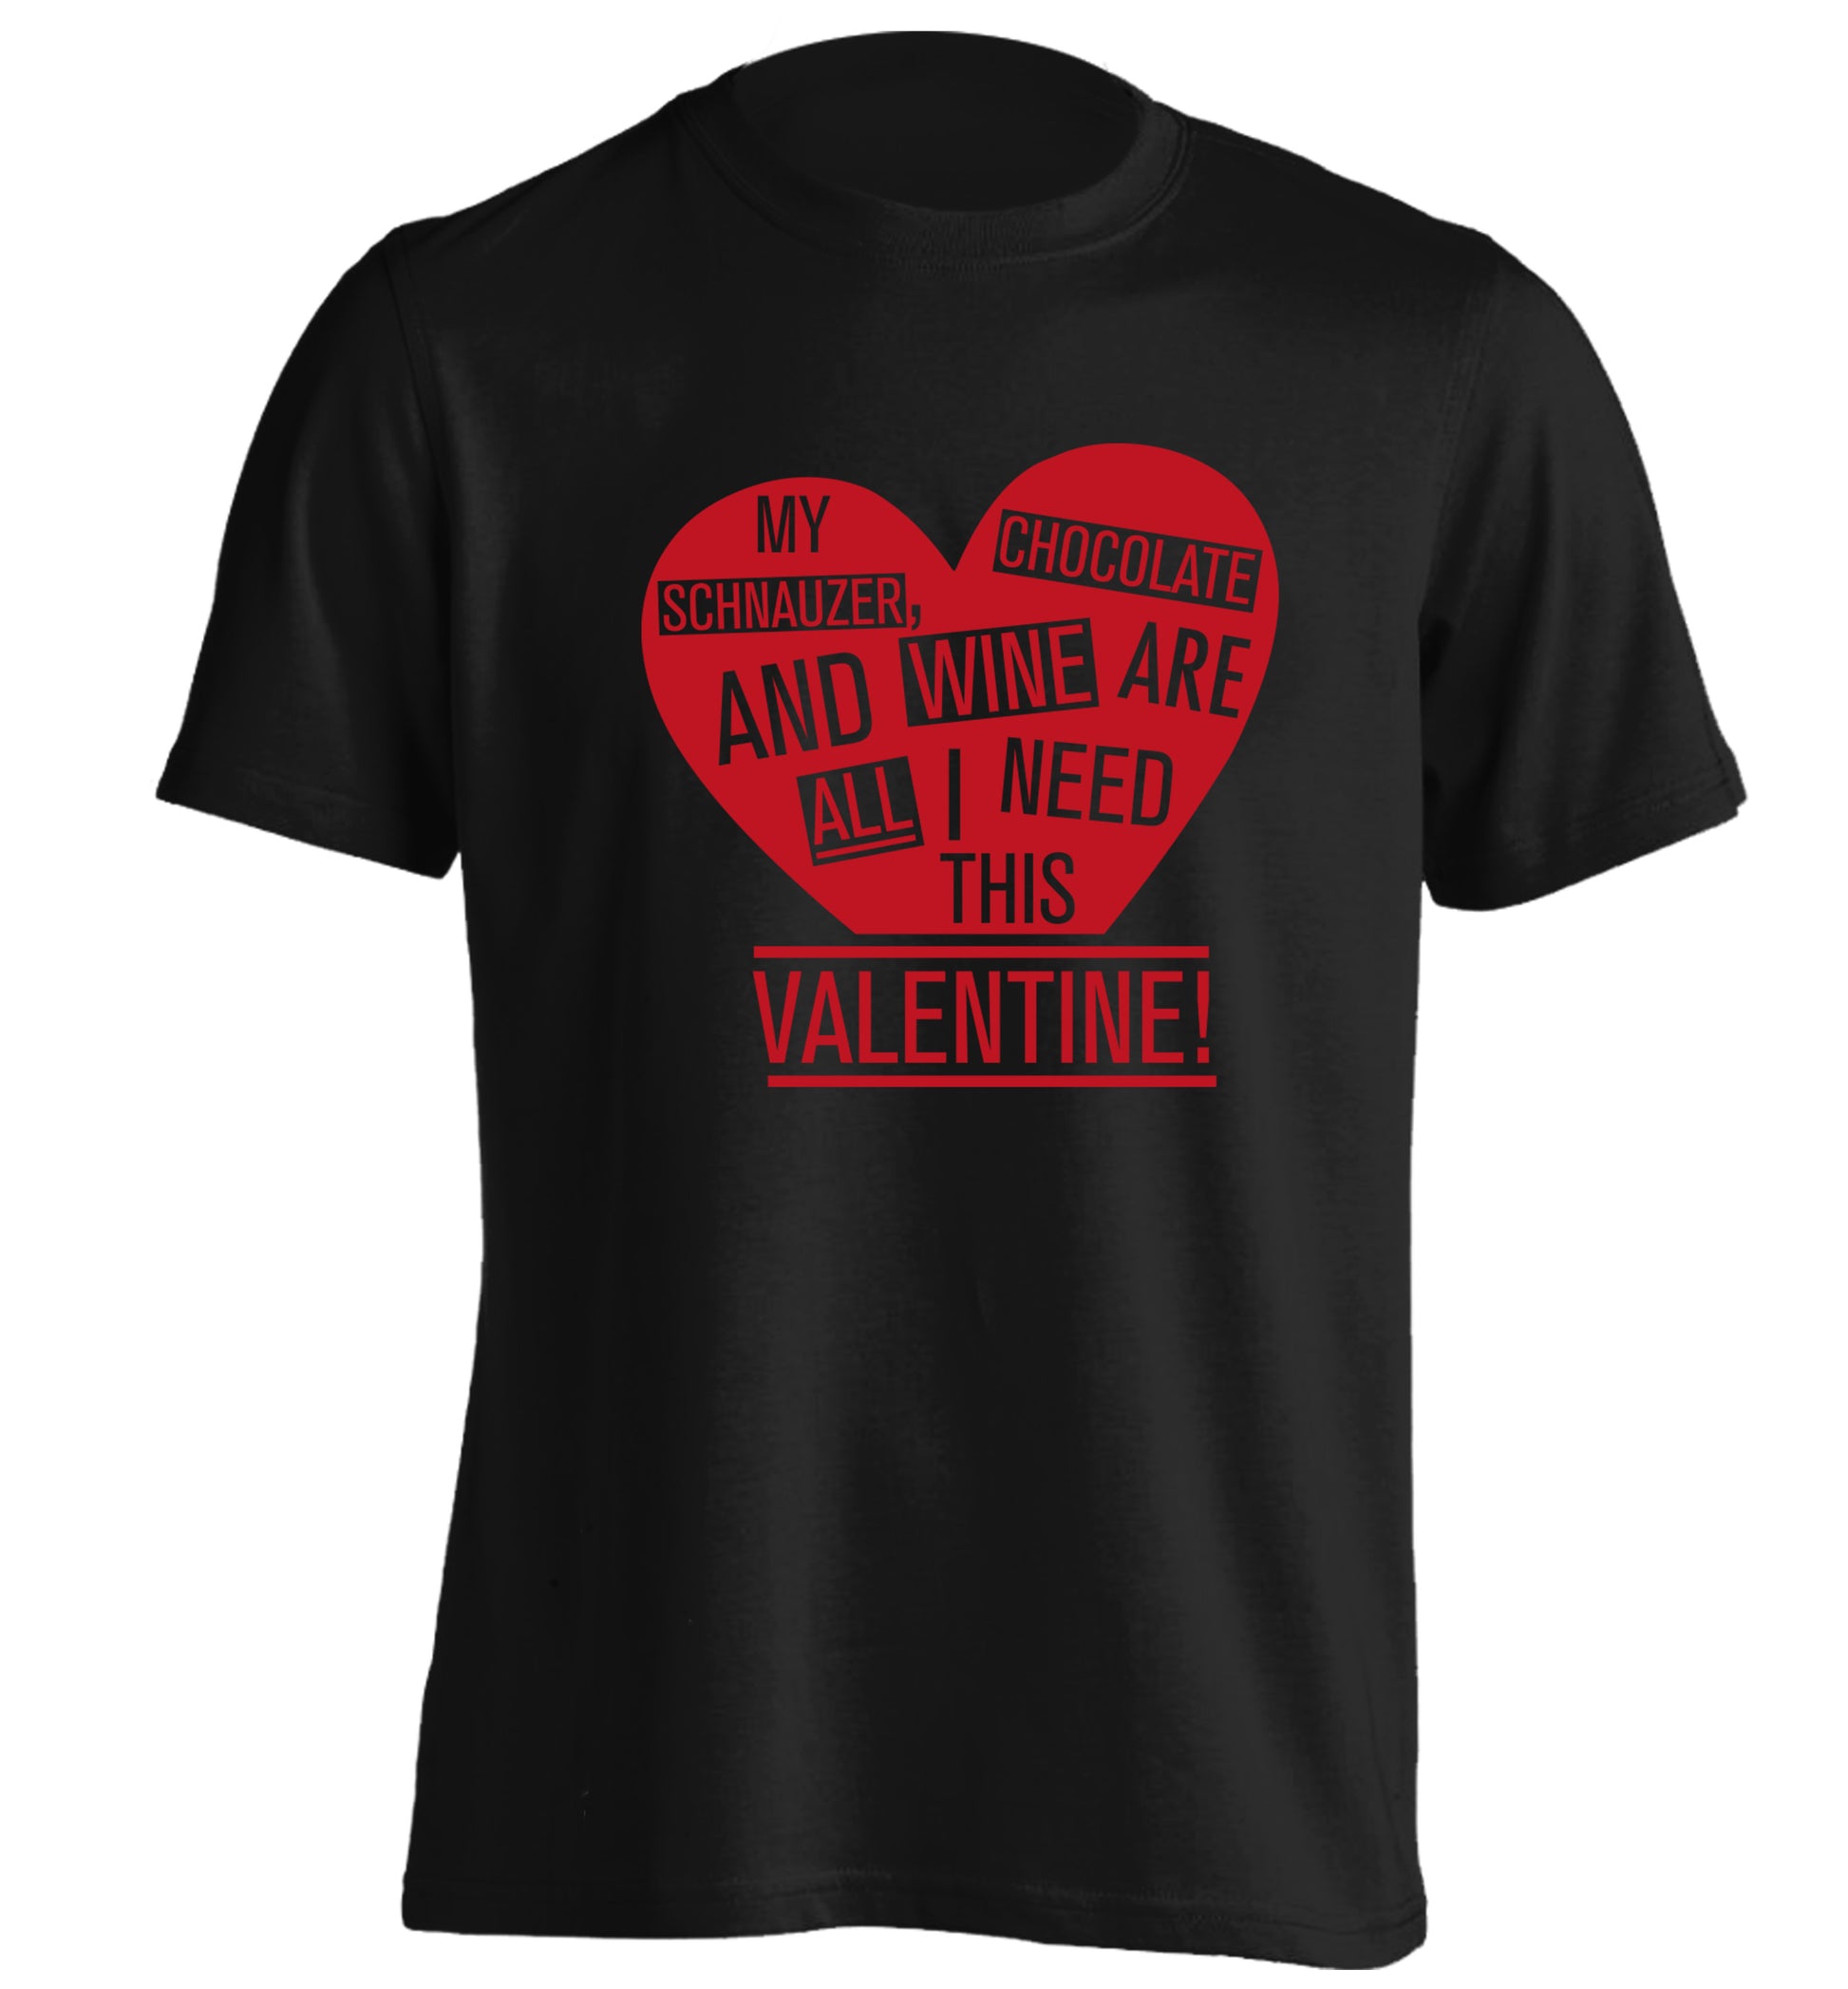 My schnauzer, chocolate and wine are all I need this valentine! adults unisex black Tshirt 2XL